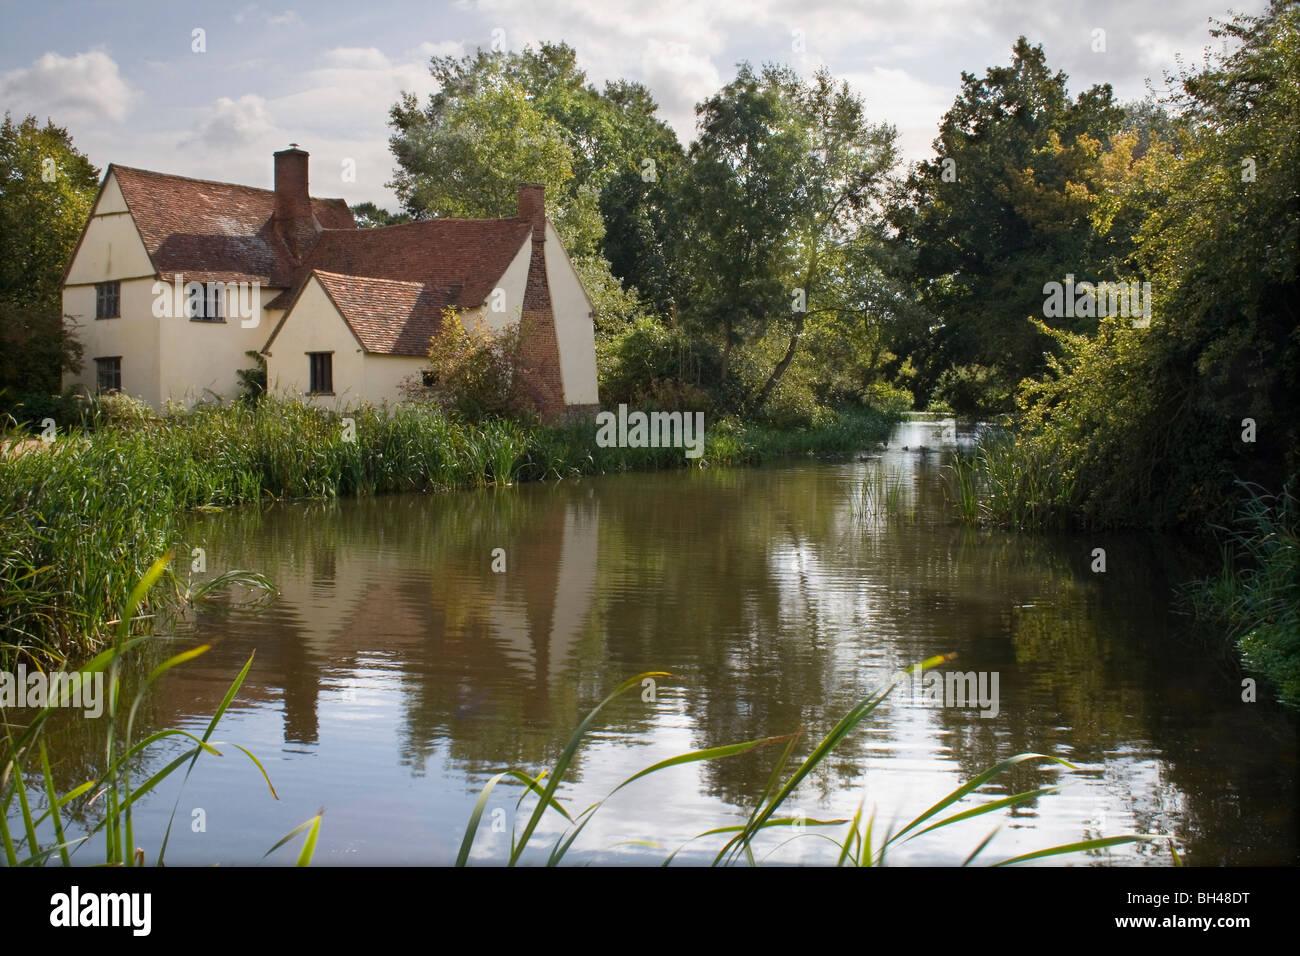 Willy Lotts cottage in John Constable country near Flatford Mill. Stock Photo